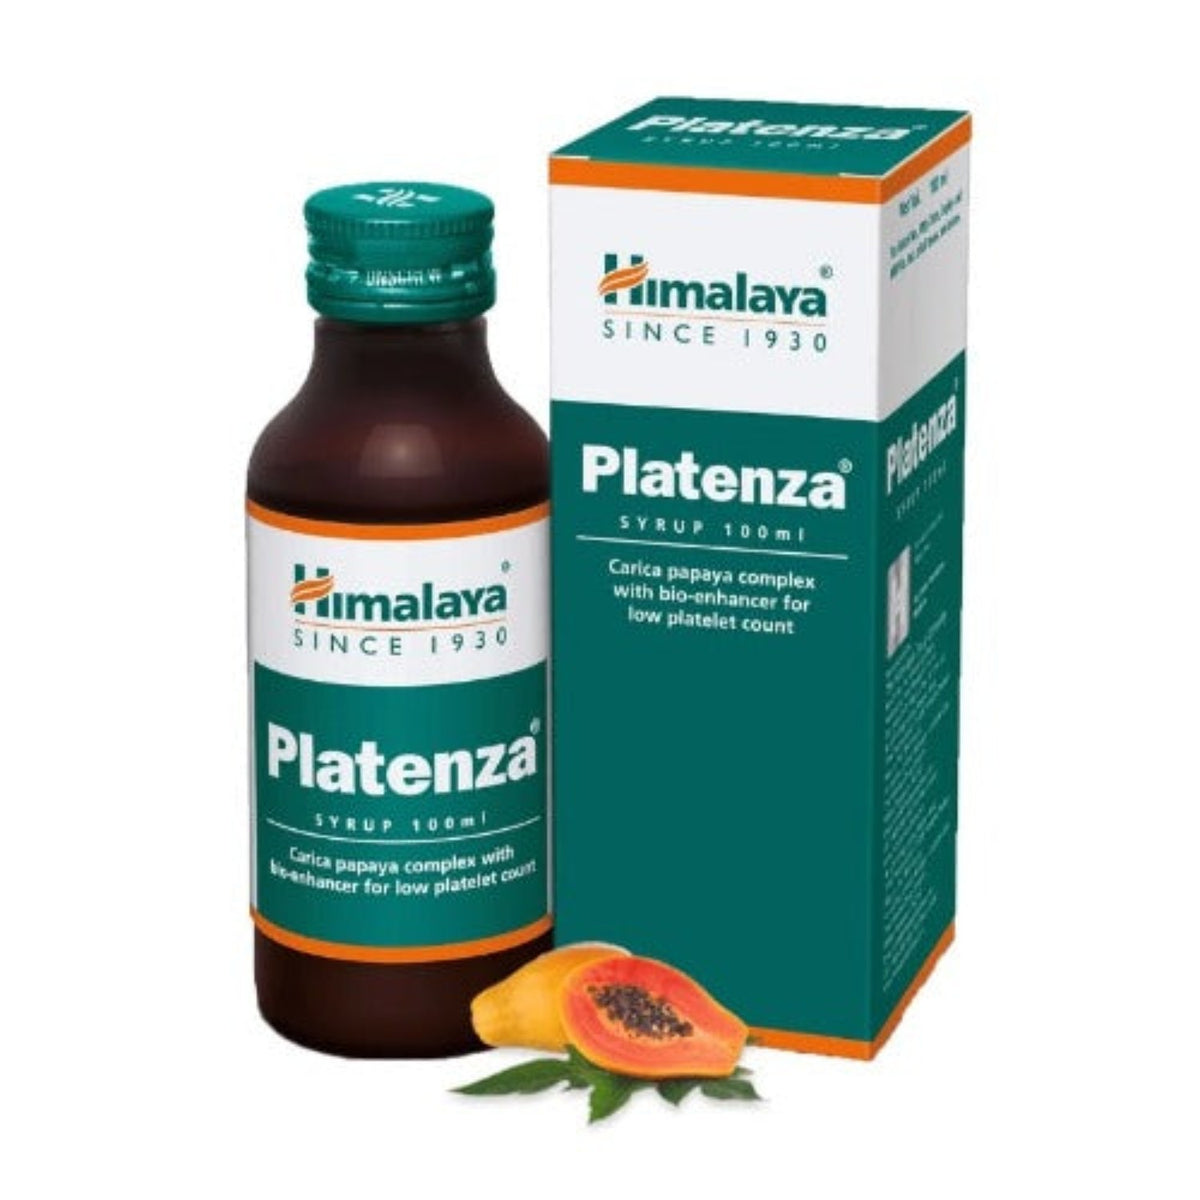 Himalaya Herbal Ayurvedic Platenza Carica Papaya Complex With Bioenhancer For Low Platelet Count Syrup 100 ml